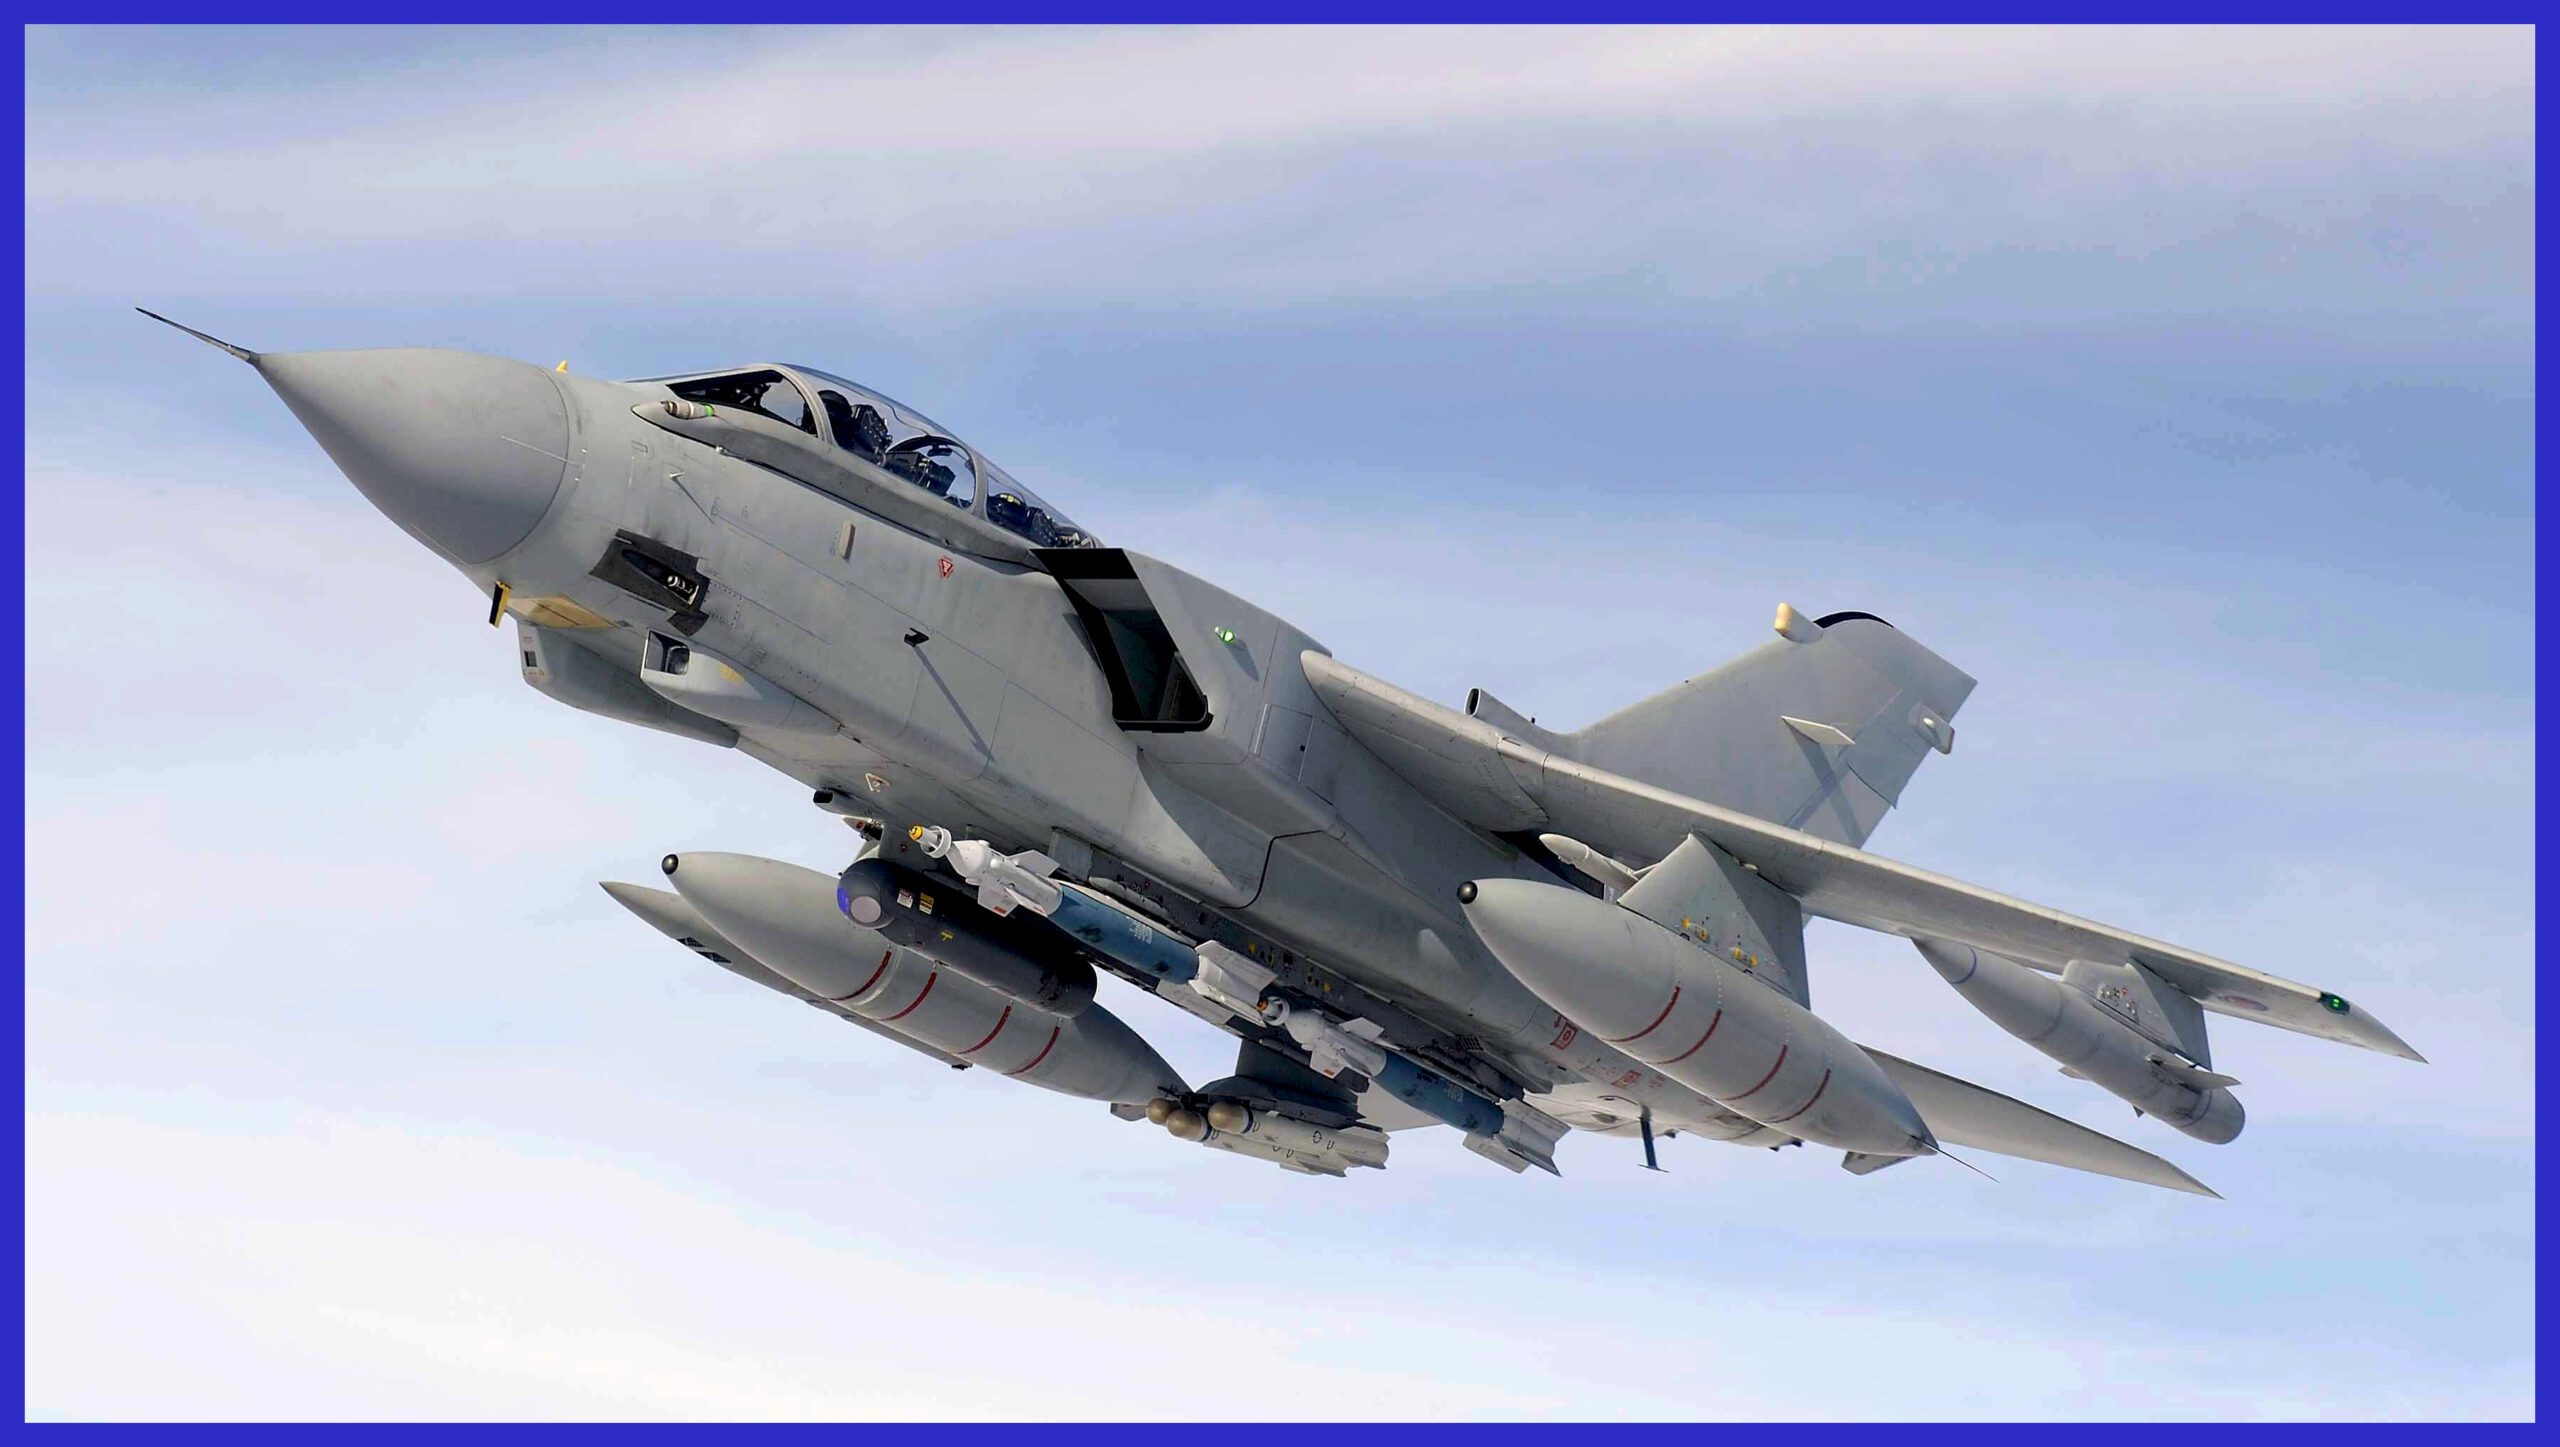 Photo Credit: RAF, Panavia Tornado-gr.4 armed with two Paveway II LGB and two Brimstone missile.